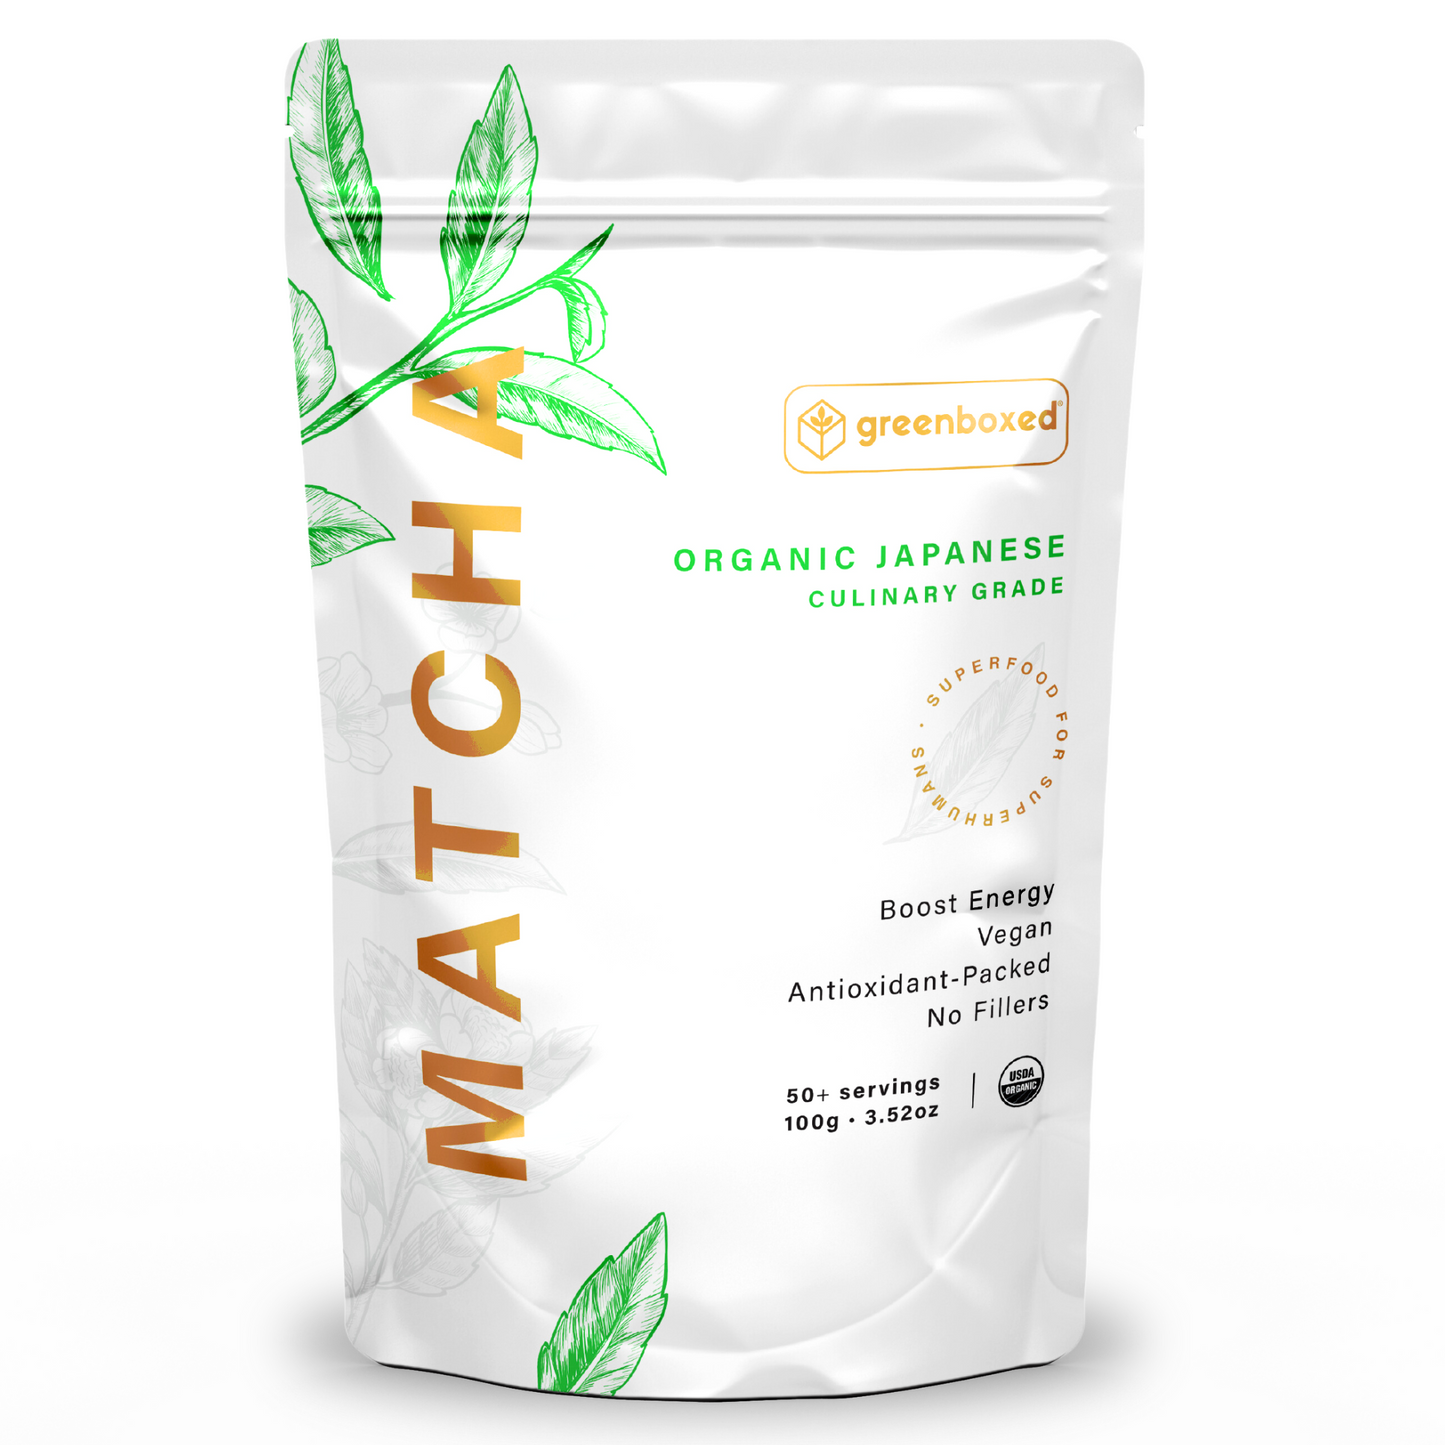 Greenboxed organic Japanese matcha. Culinary grade. 3.52oz - 100g matcha bag. White pouch BPA free. 50 to 100 servings. Best for culinary purposes.